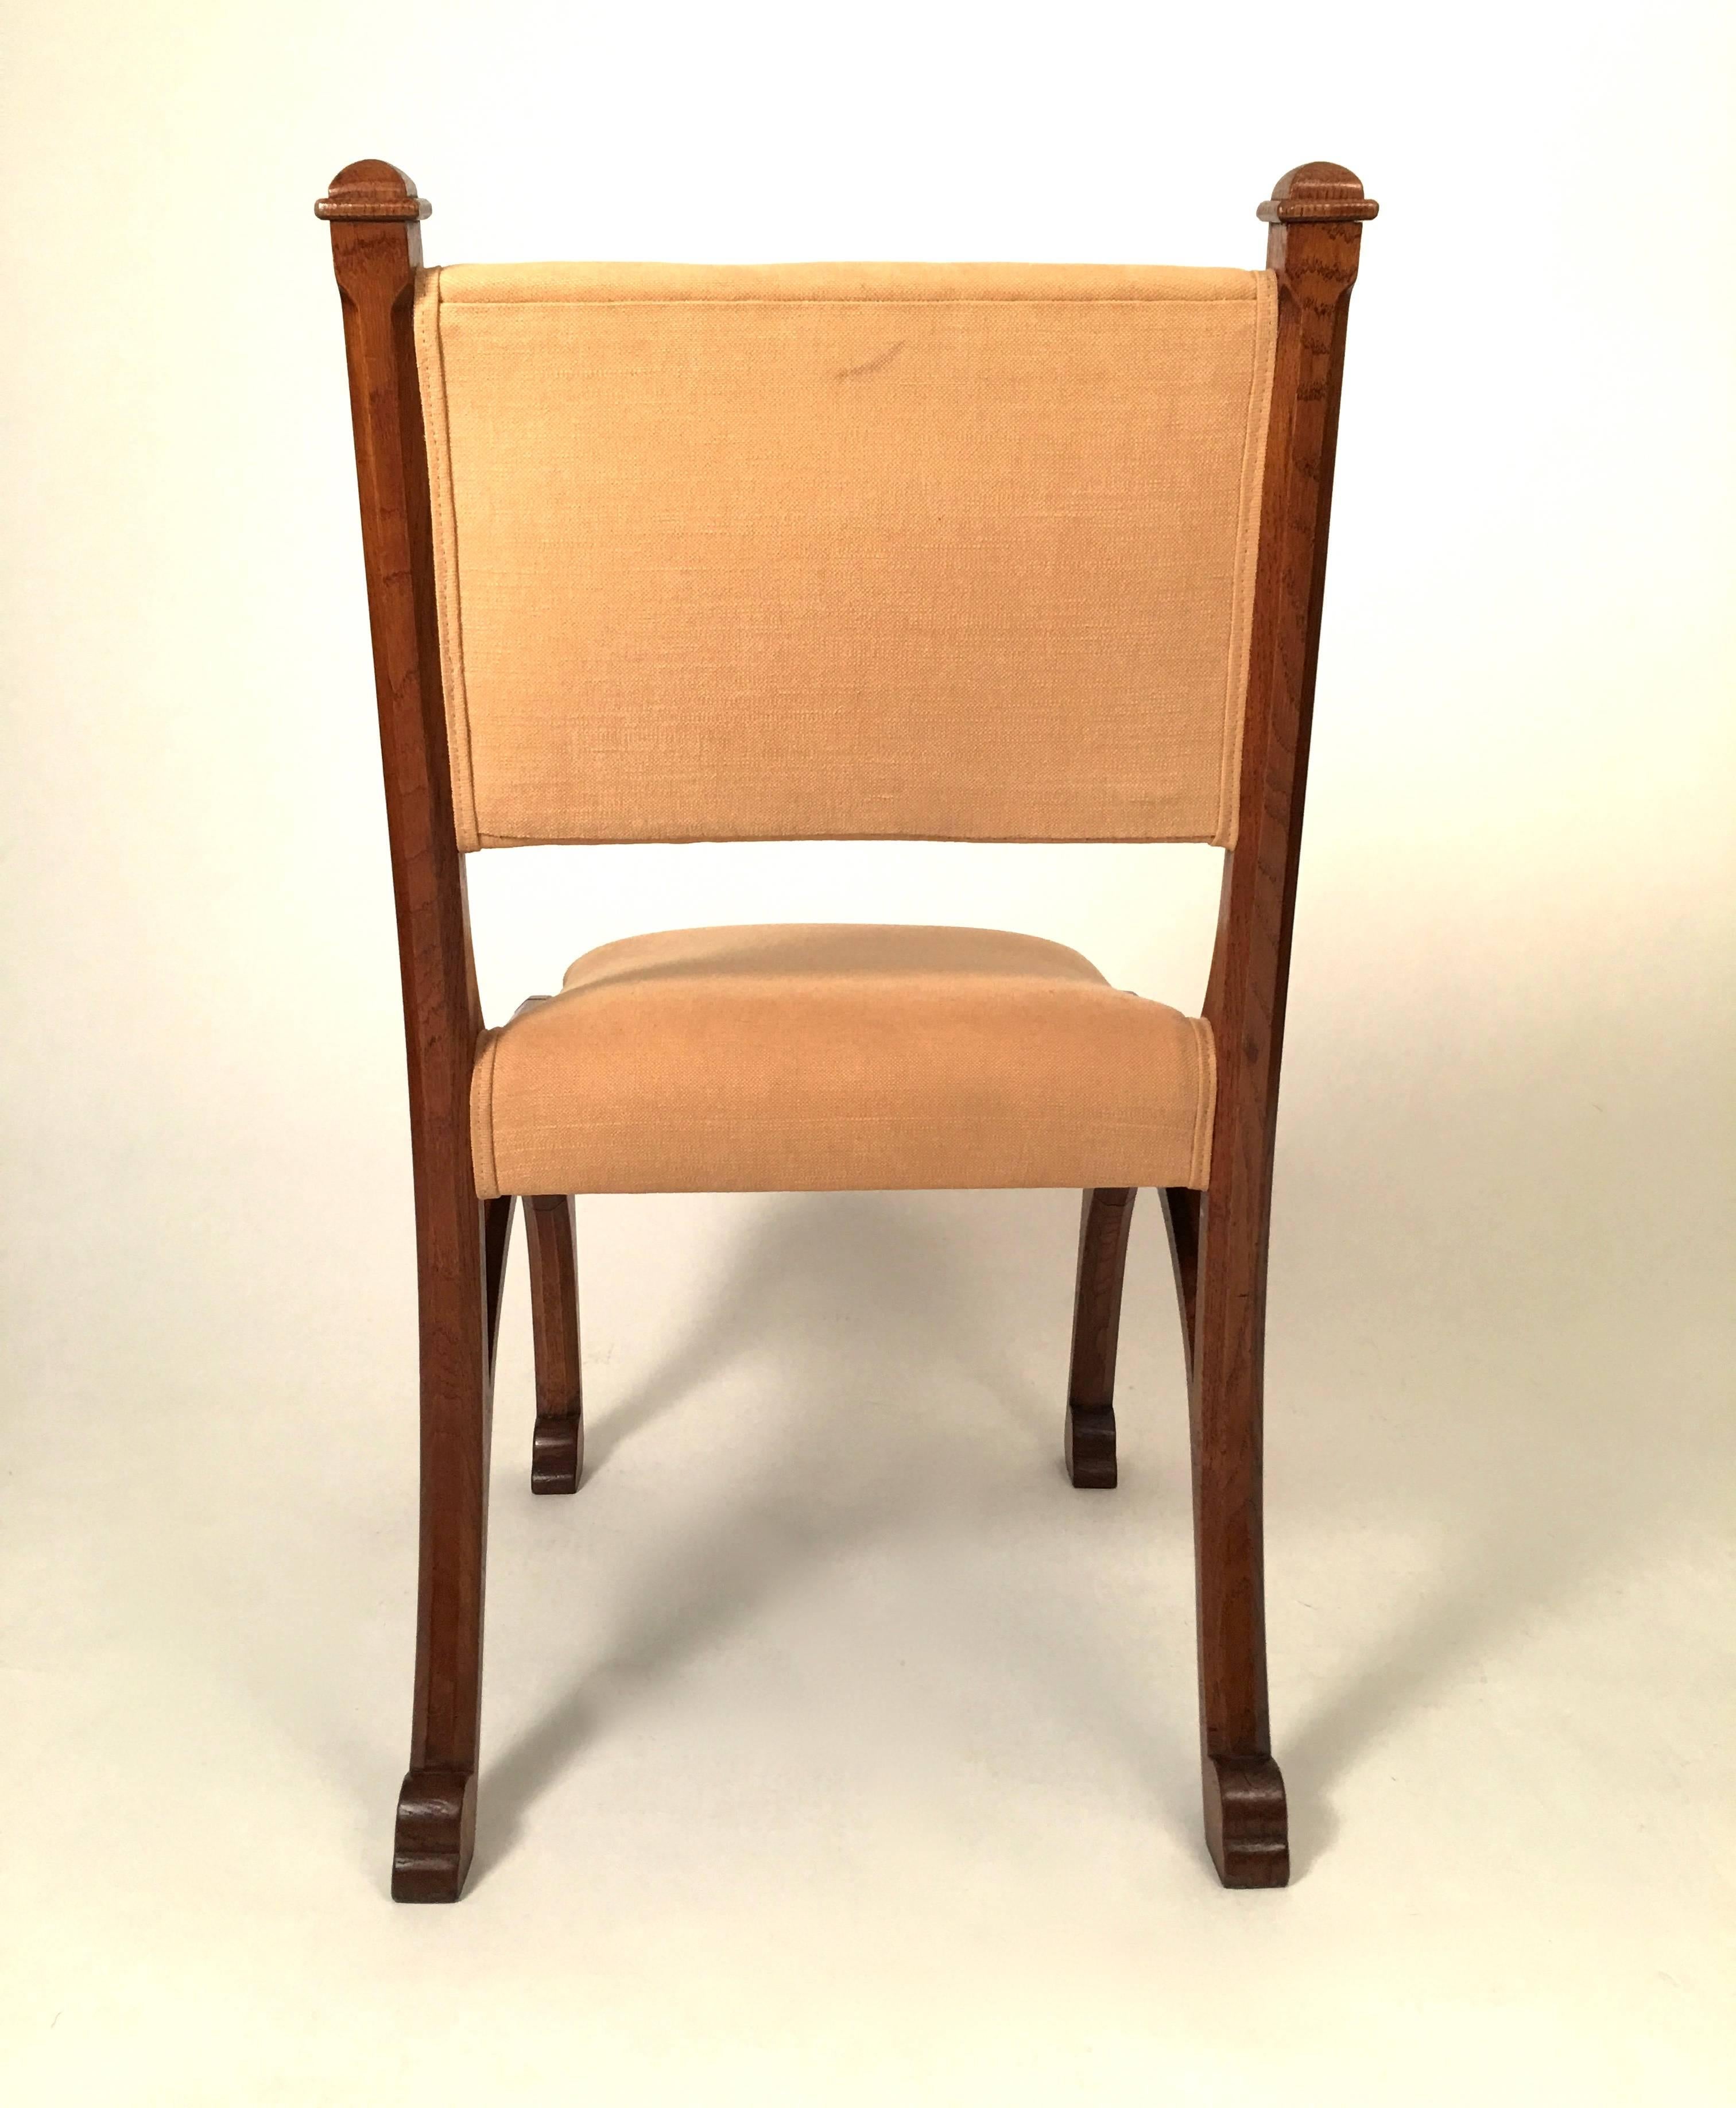 Late 19th Century English Arts and Crafts Gothic Revival Chair 